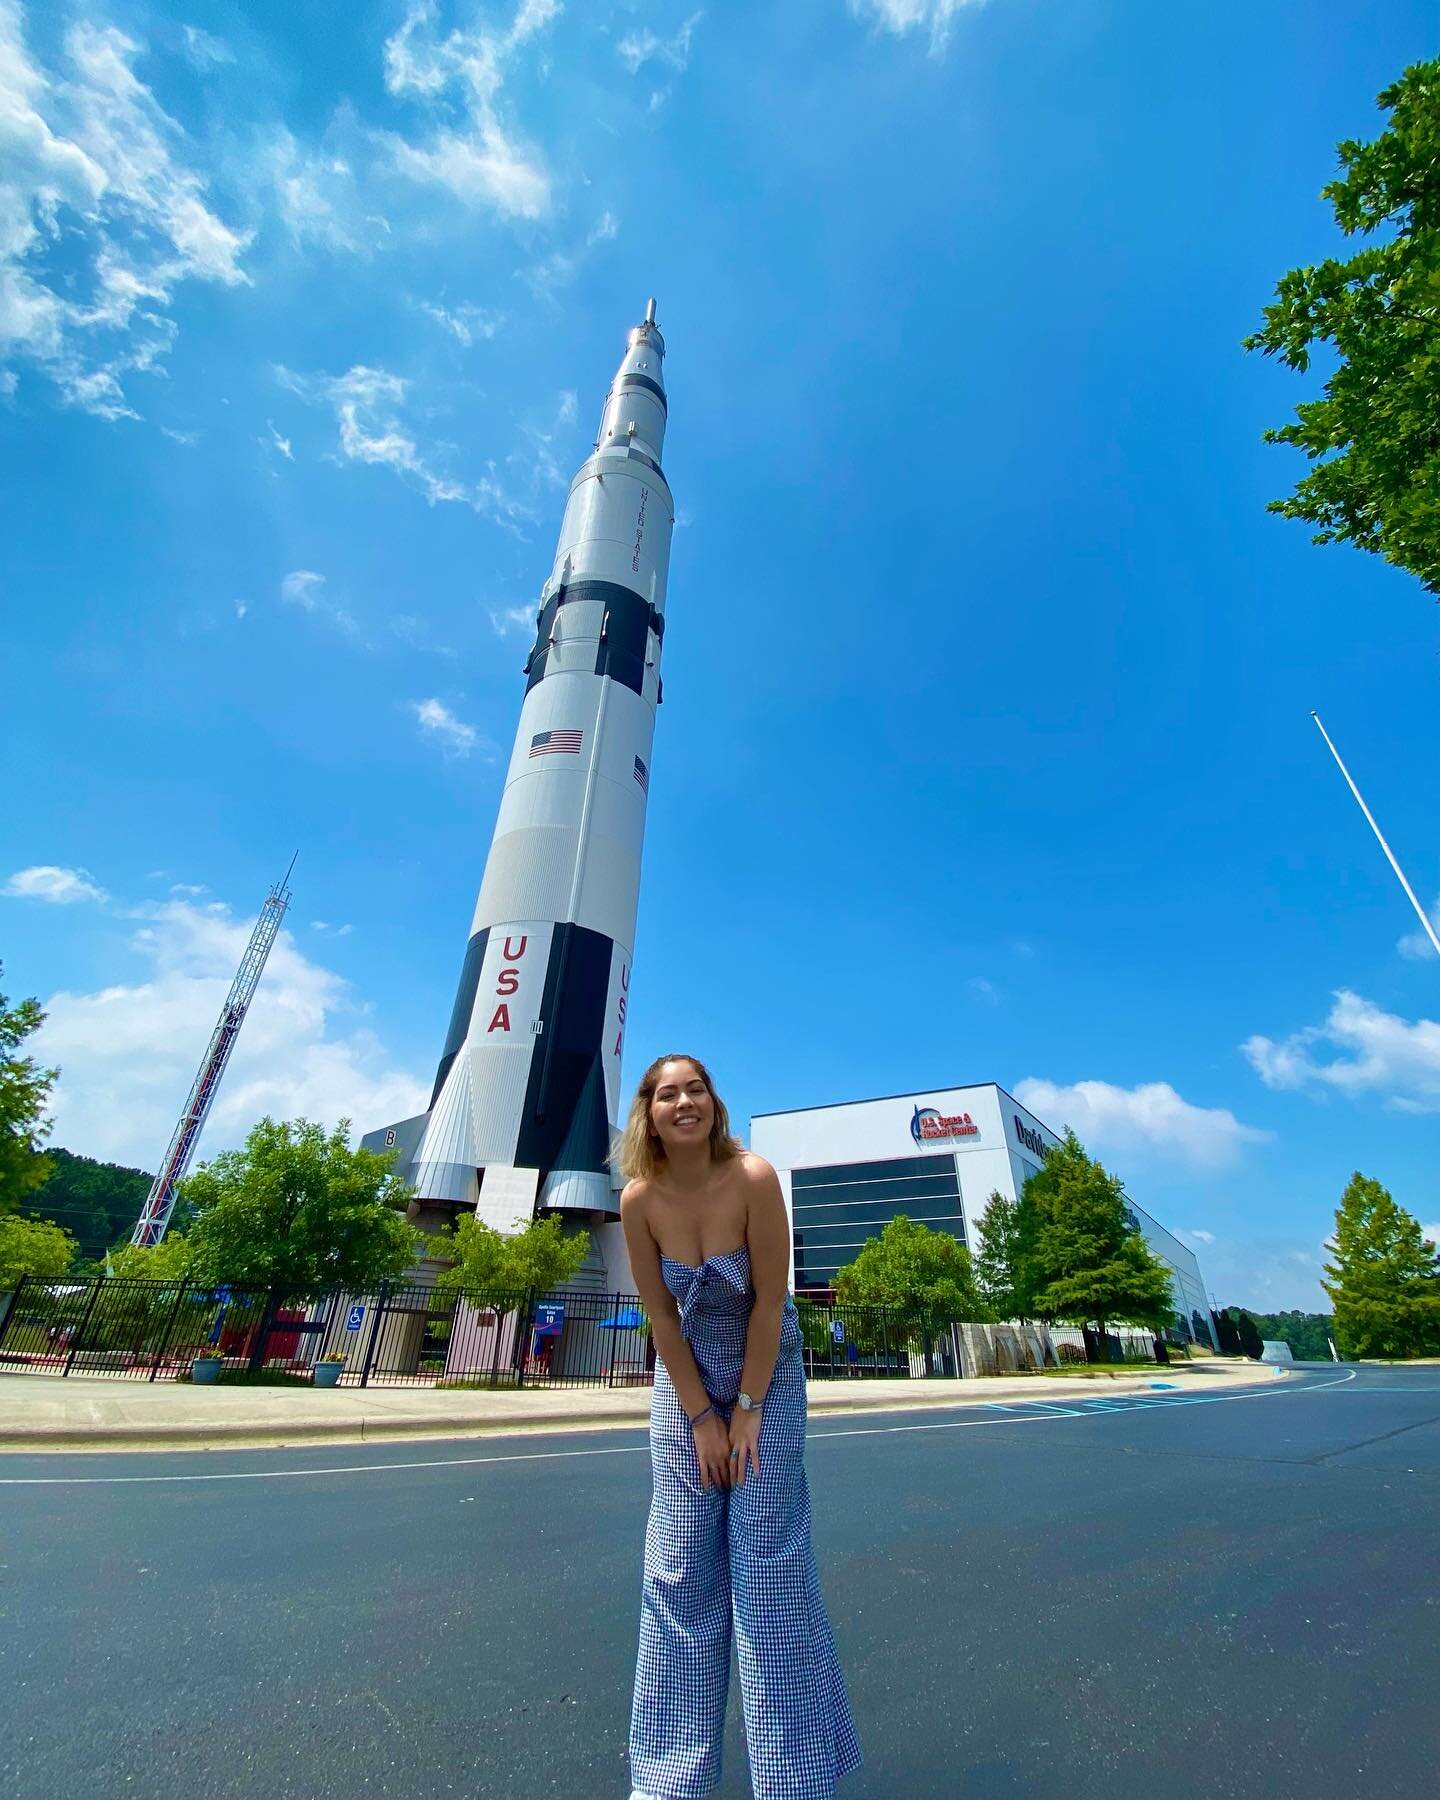 ✨&ldquo;One step for (wo)man, one huge leap for (wo)mankind&rdquo;⚡️

Dreaming as big as the stars and the universe, this place reminded me that the sky isn&rsquo;t the limit 💫

Swipe ➡️ to see me nerding out 🤓 at the sight of the 🚀🚀

#NASA #NASA